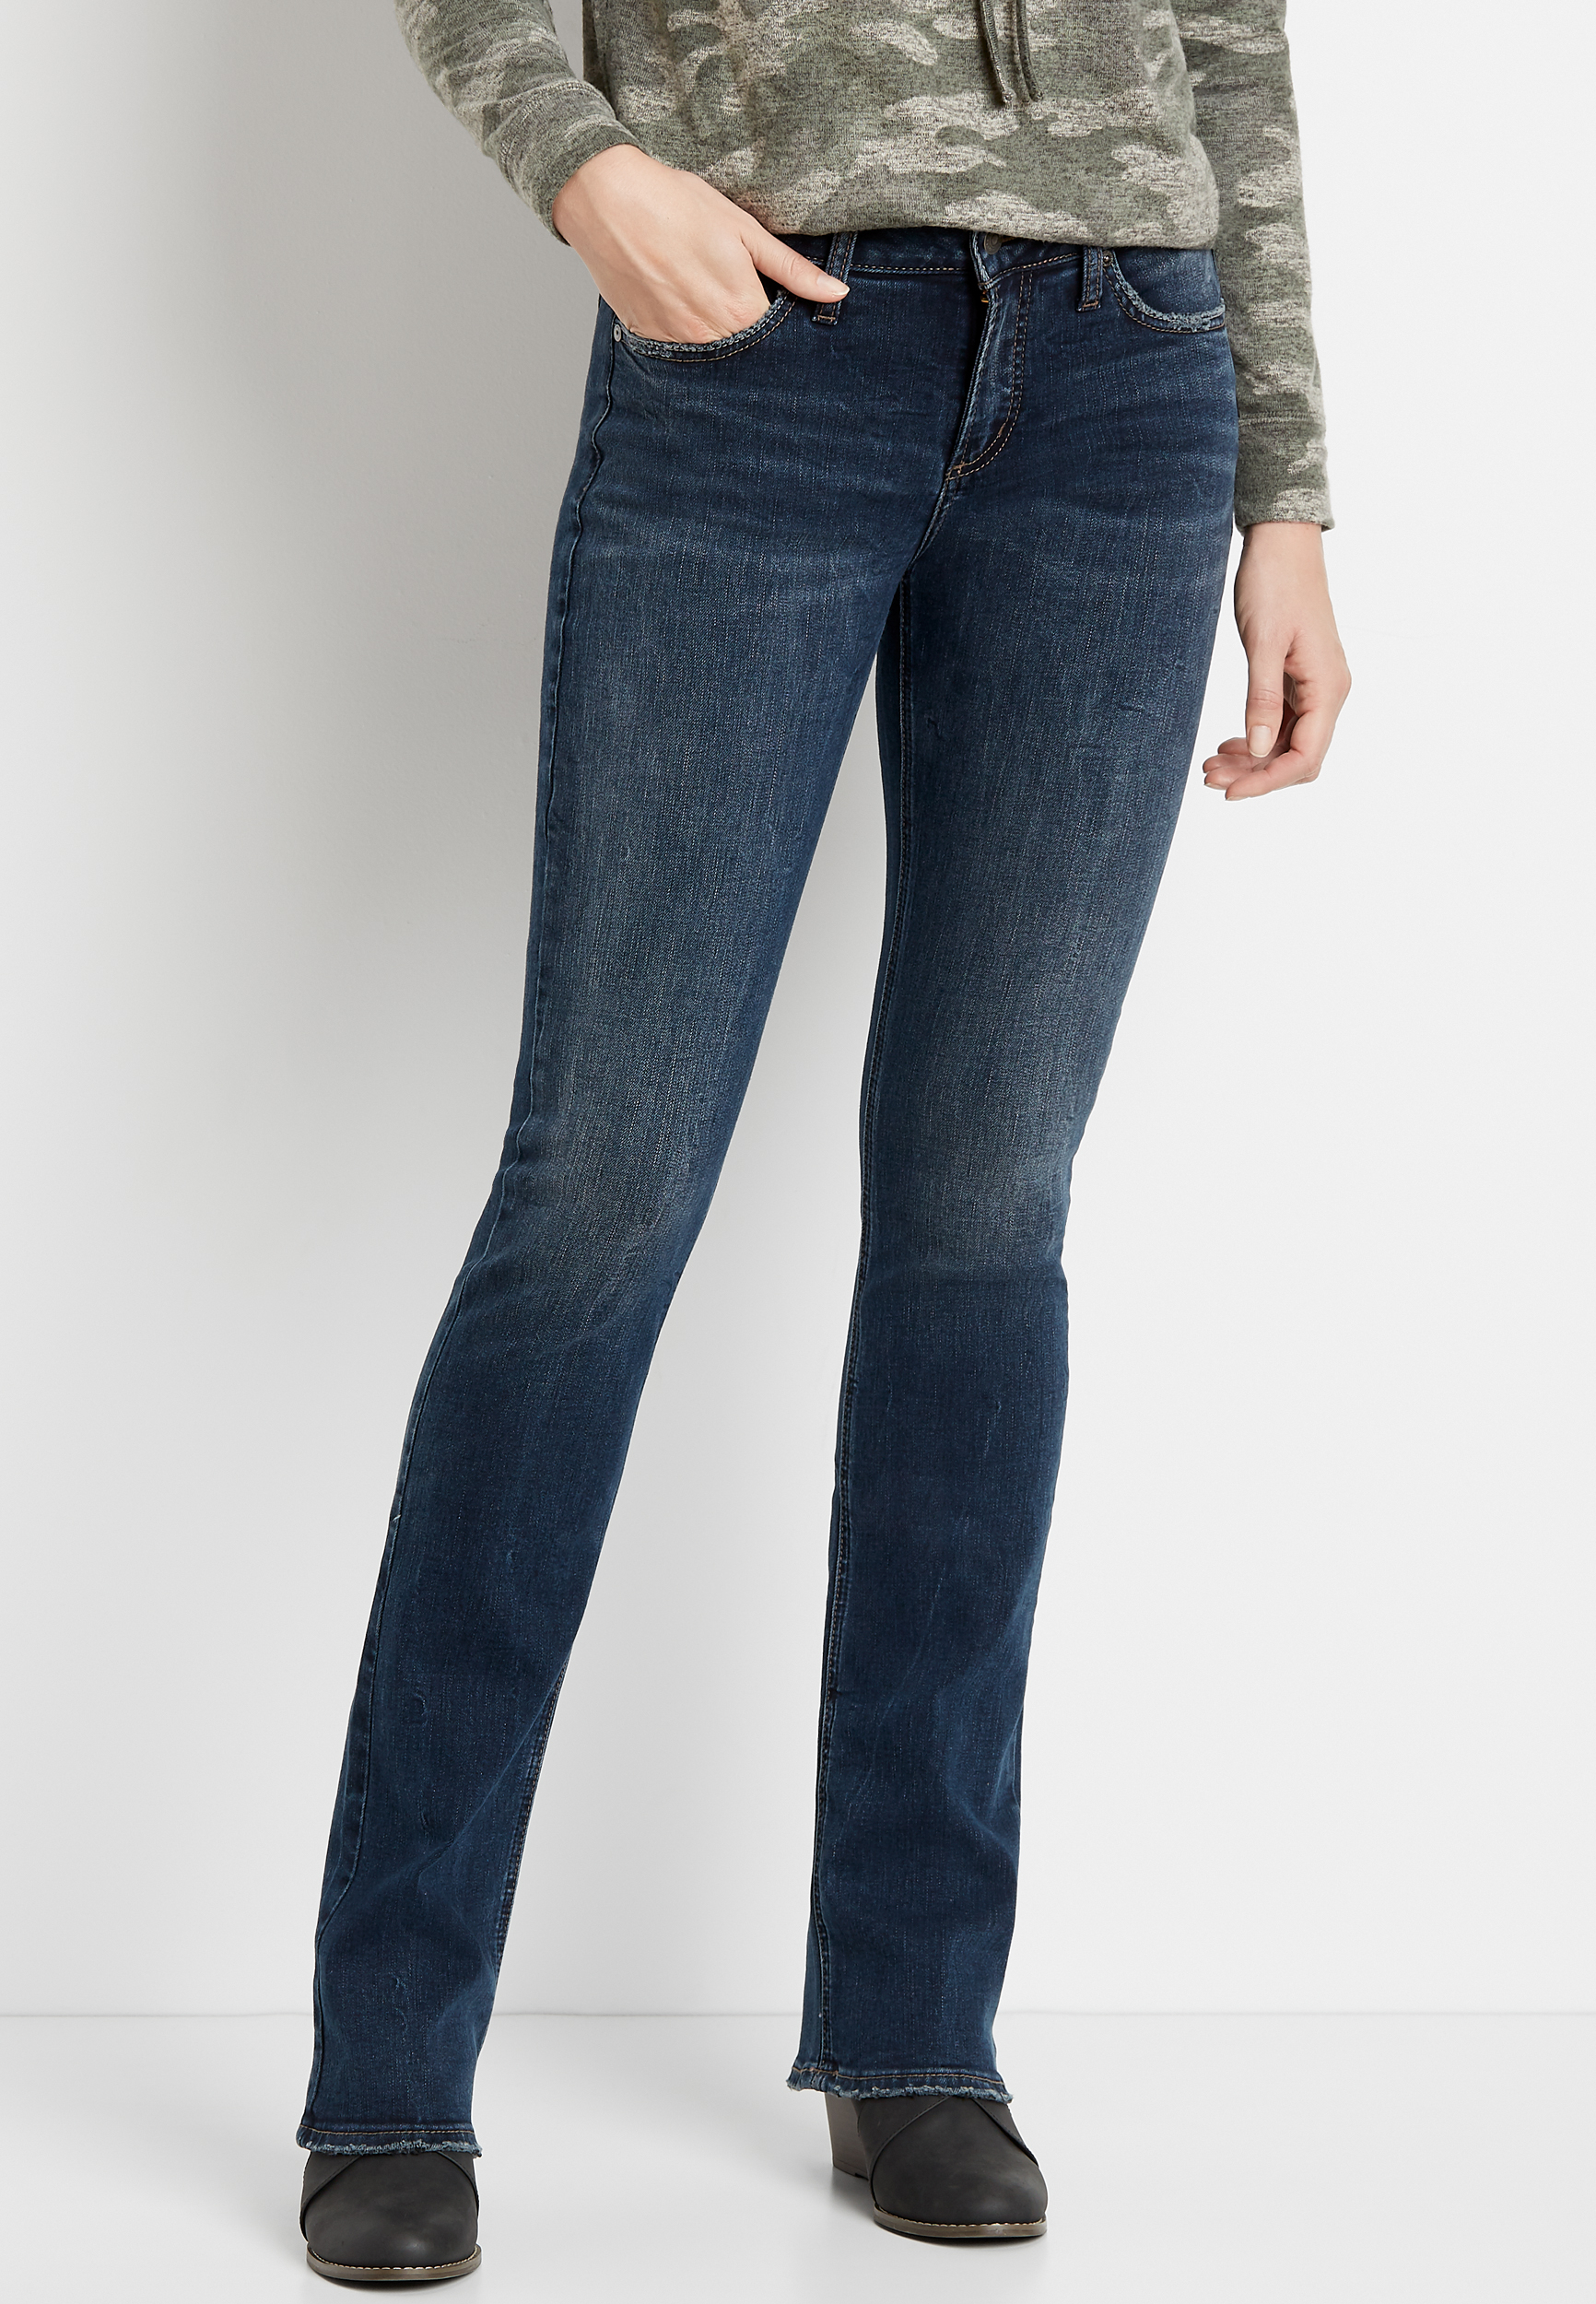 Silver Jeans Co.® Avery High Rise Dark Wash Slim Boot Jean | maurices